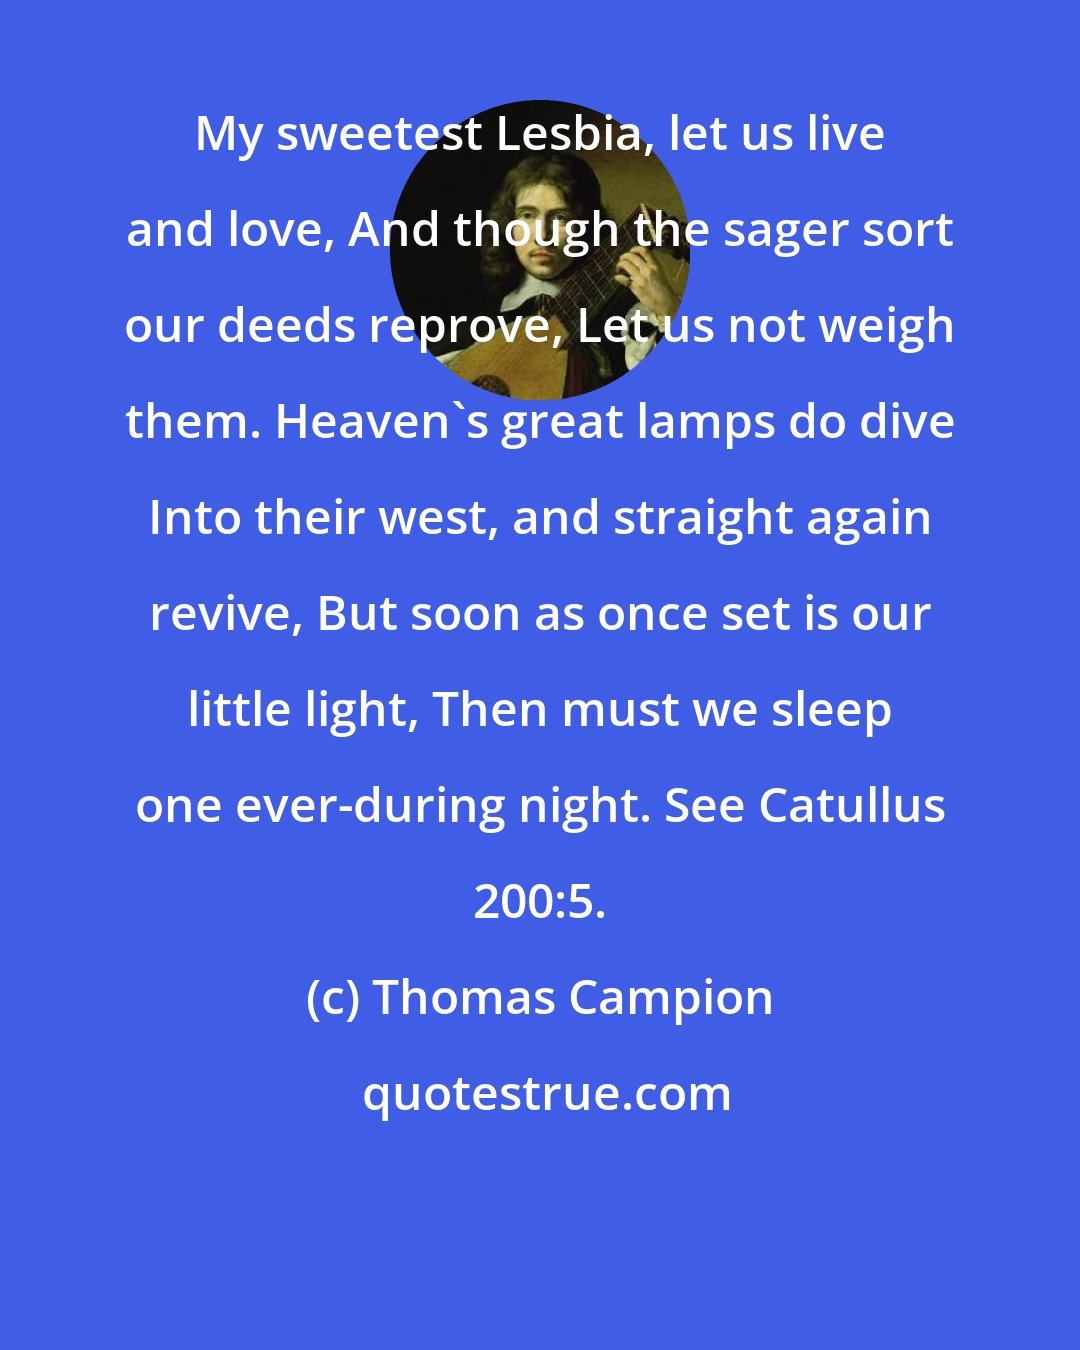 Thomas Campion: My sweetest Lesbia, let us live and love, And though the sager sort our deeds reprove, Let us not weigh them. Heaven's great lamps do dive Into their west, and straight again revive, But soon as once set is our little light, Then must we sleep one ever-during night. See Catullus 200:5.